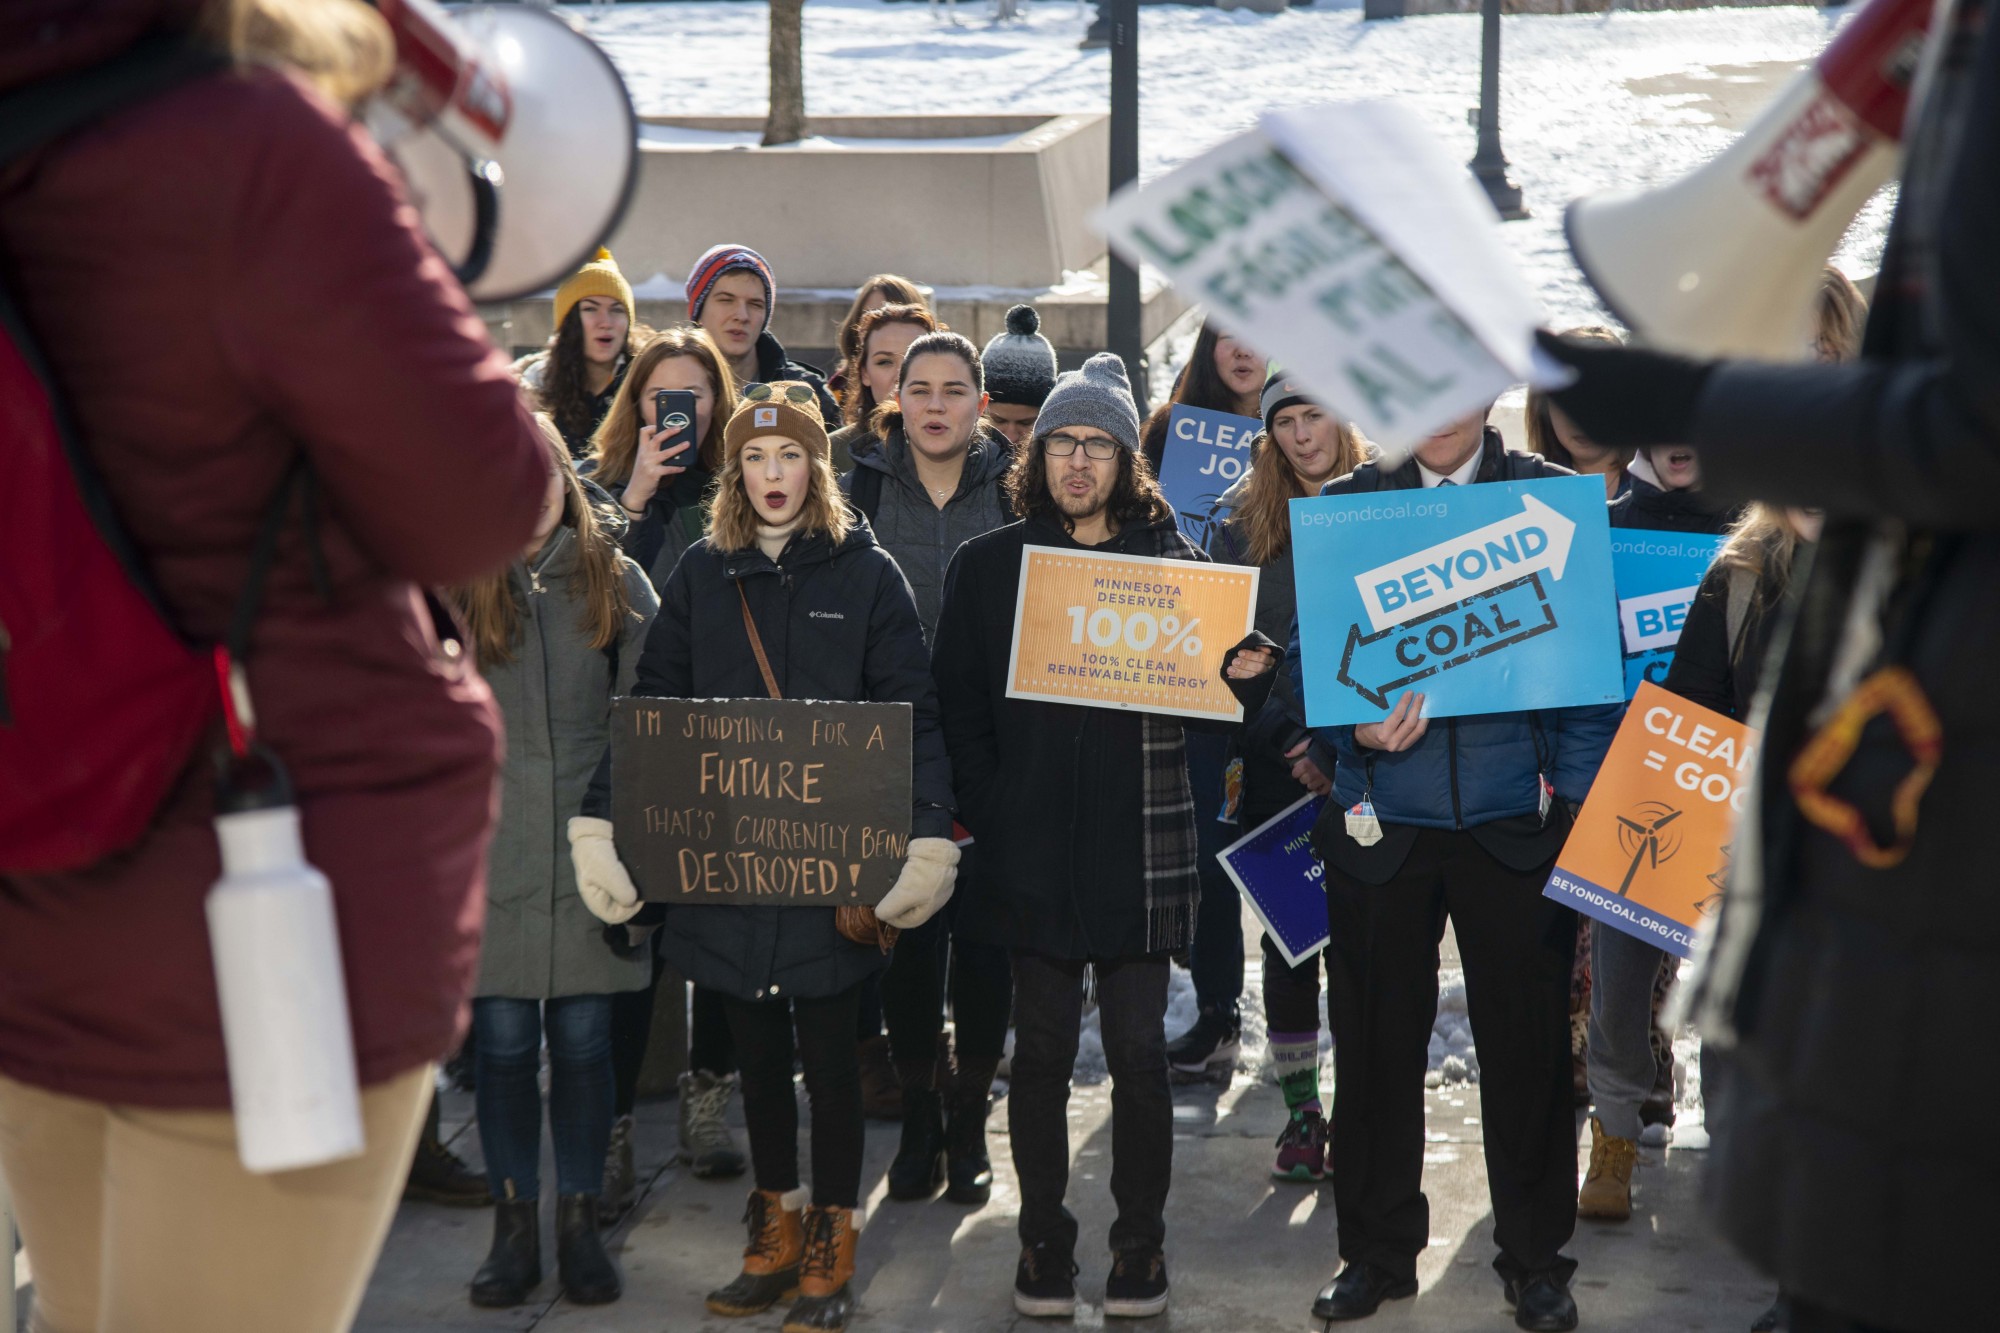 Savannah Wery, left, and Katherine Schmid, right, speak to protesters participating in the UMN Climate Strike outside of Coffman Union on Friday, Dec. 6. Those in attendance criticized the University’s policies on fossil fuel usage.